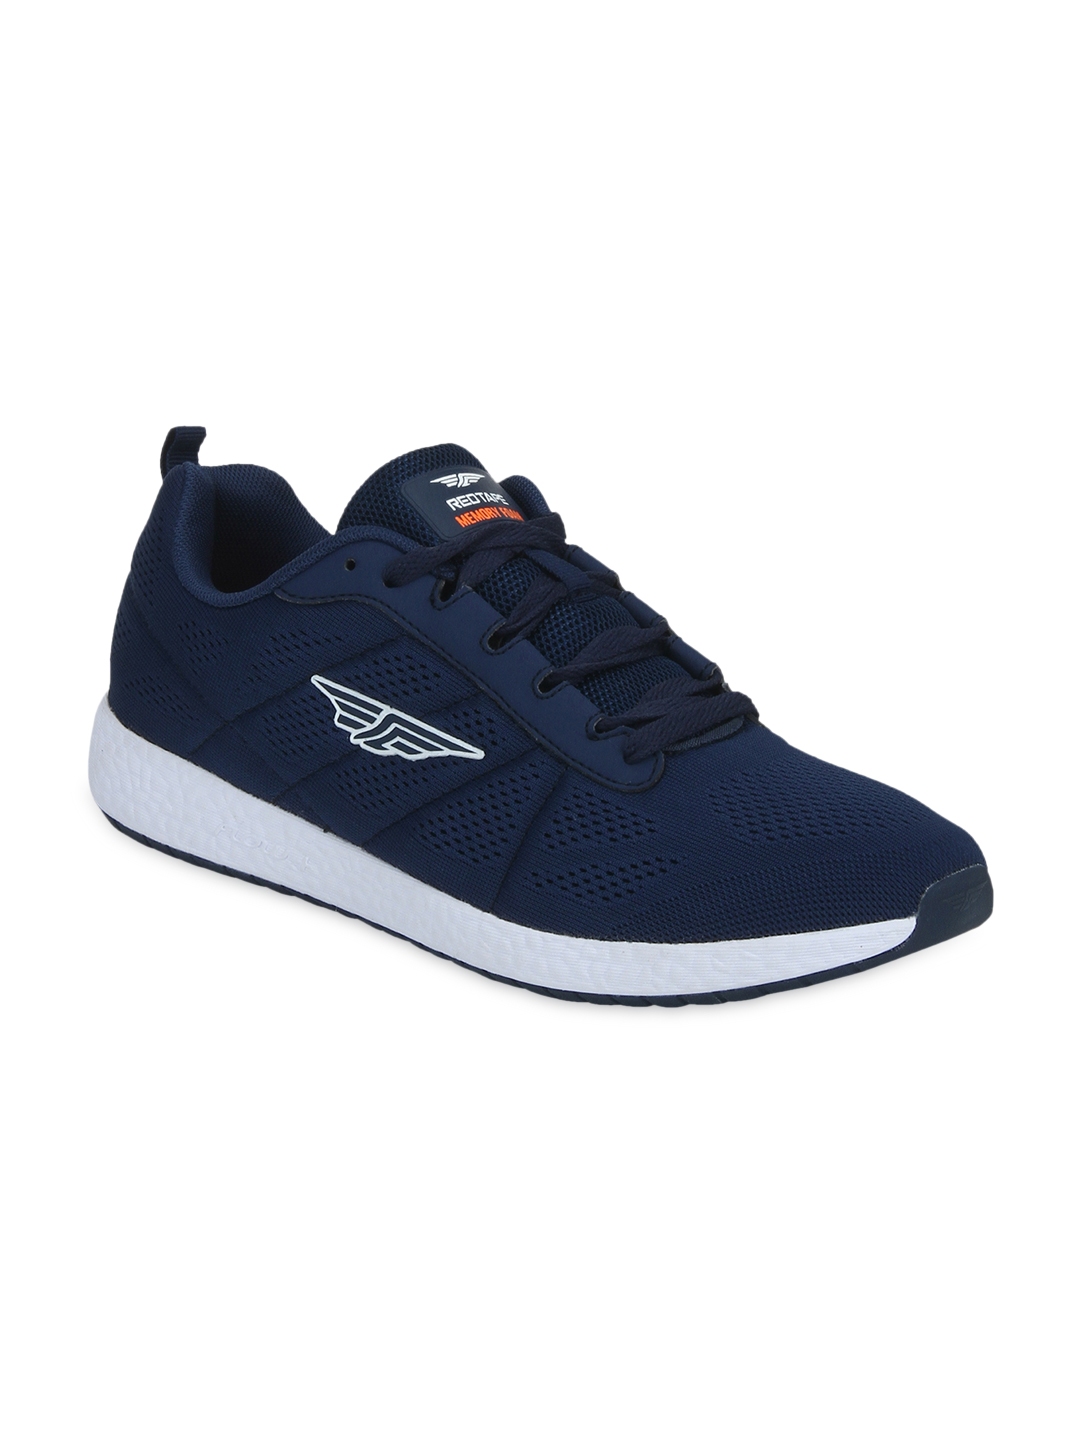 red tape men's blue running shoes